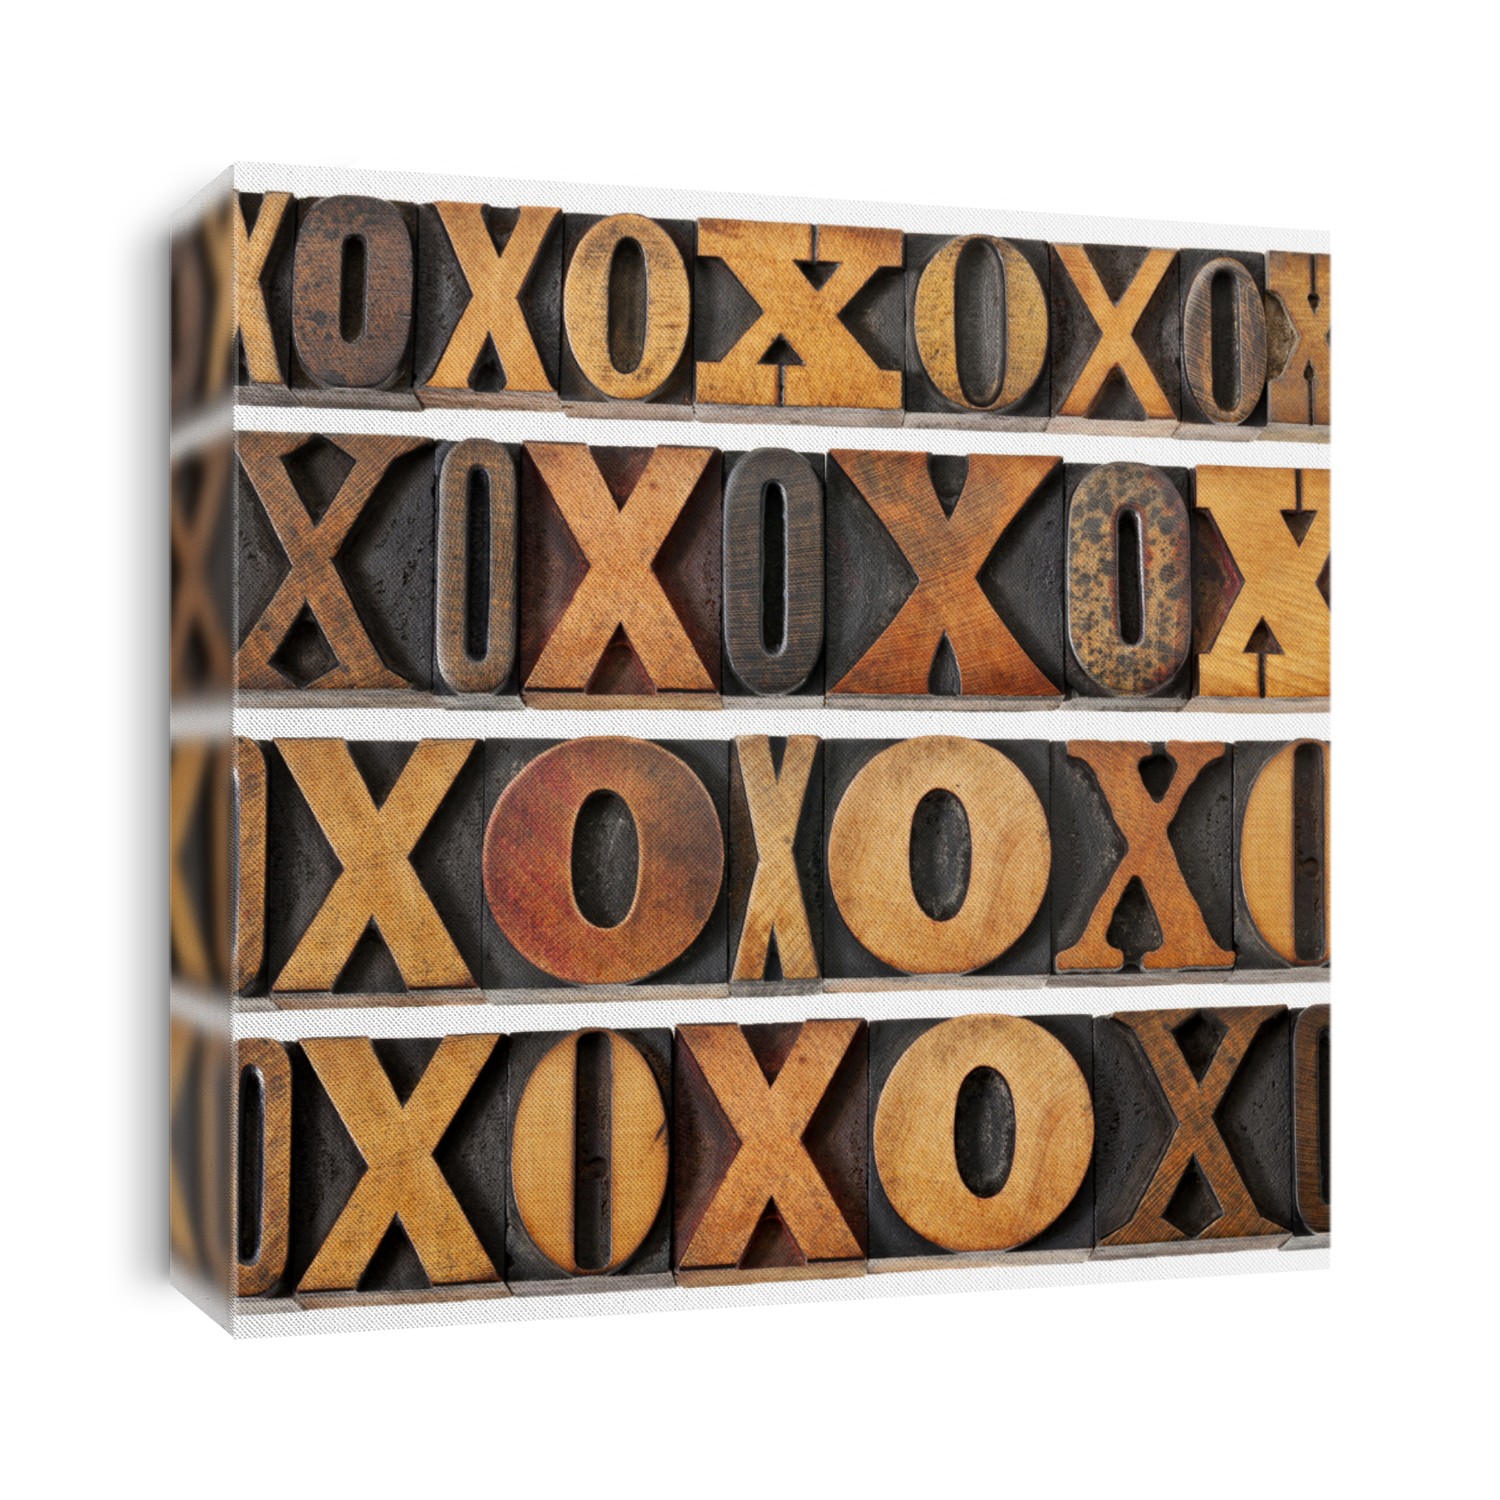 letters O and X in vintage letterpress wood type - four rows of different fonts - decoration or design elements